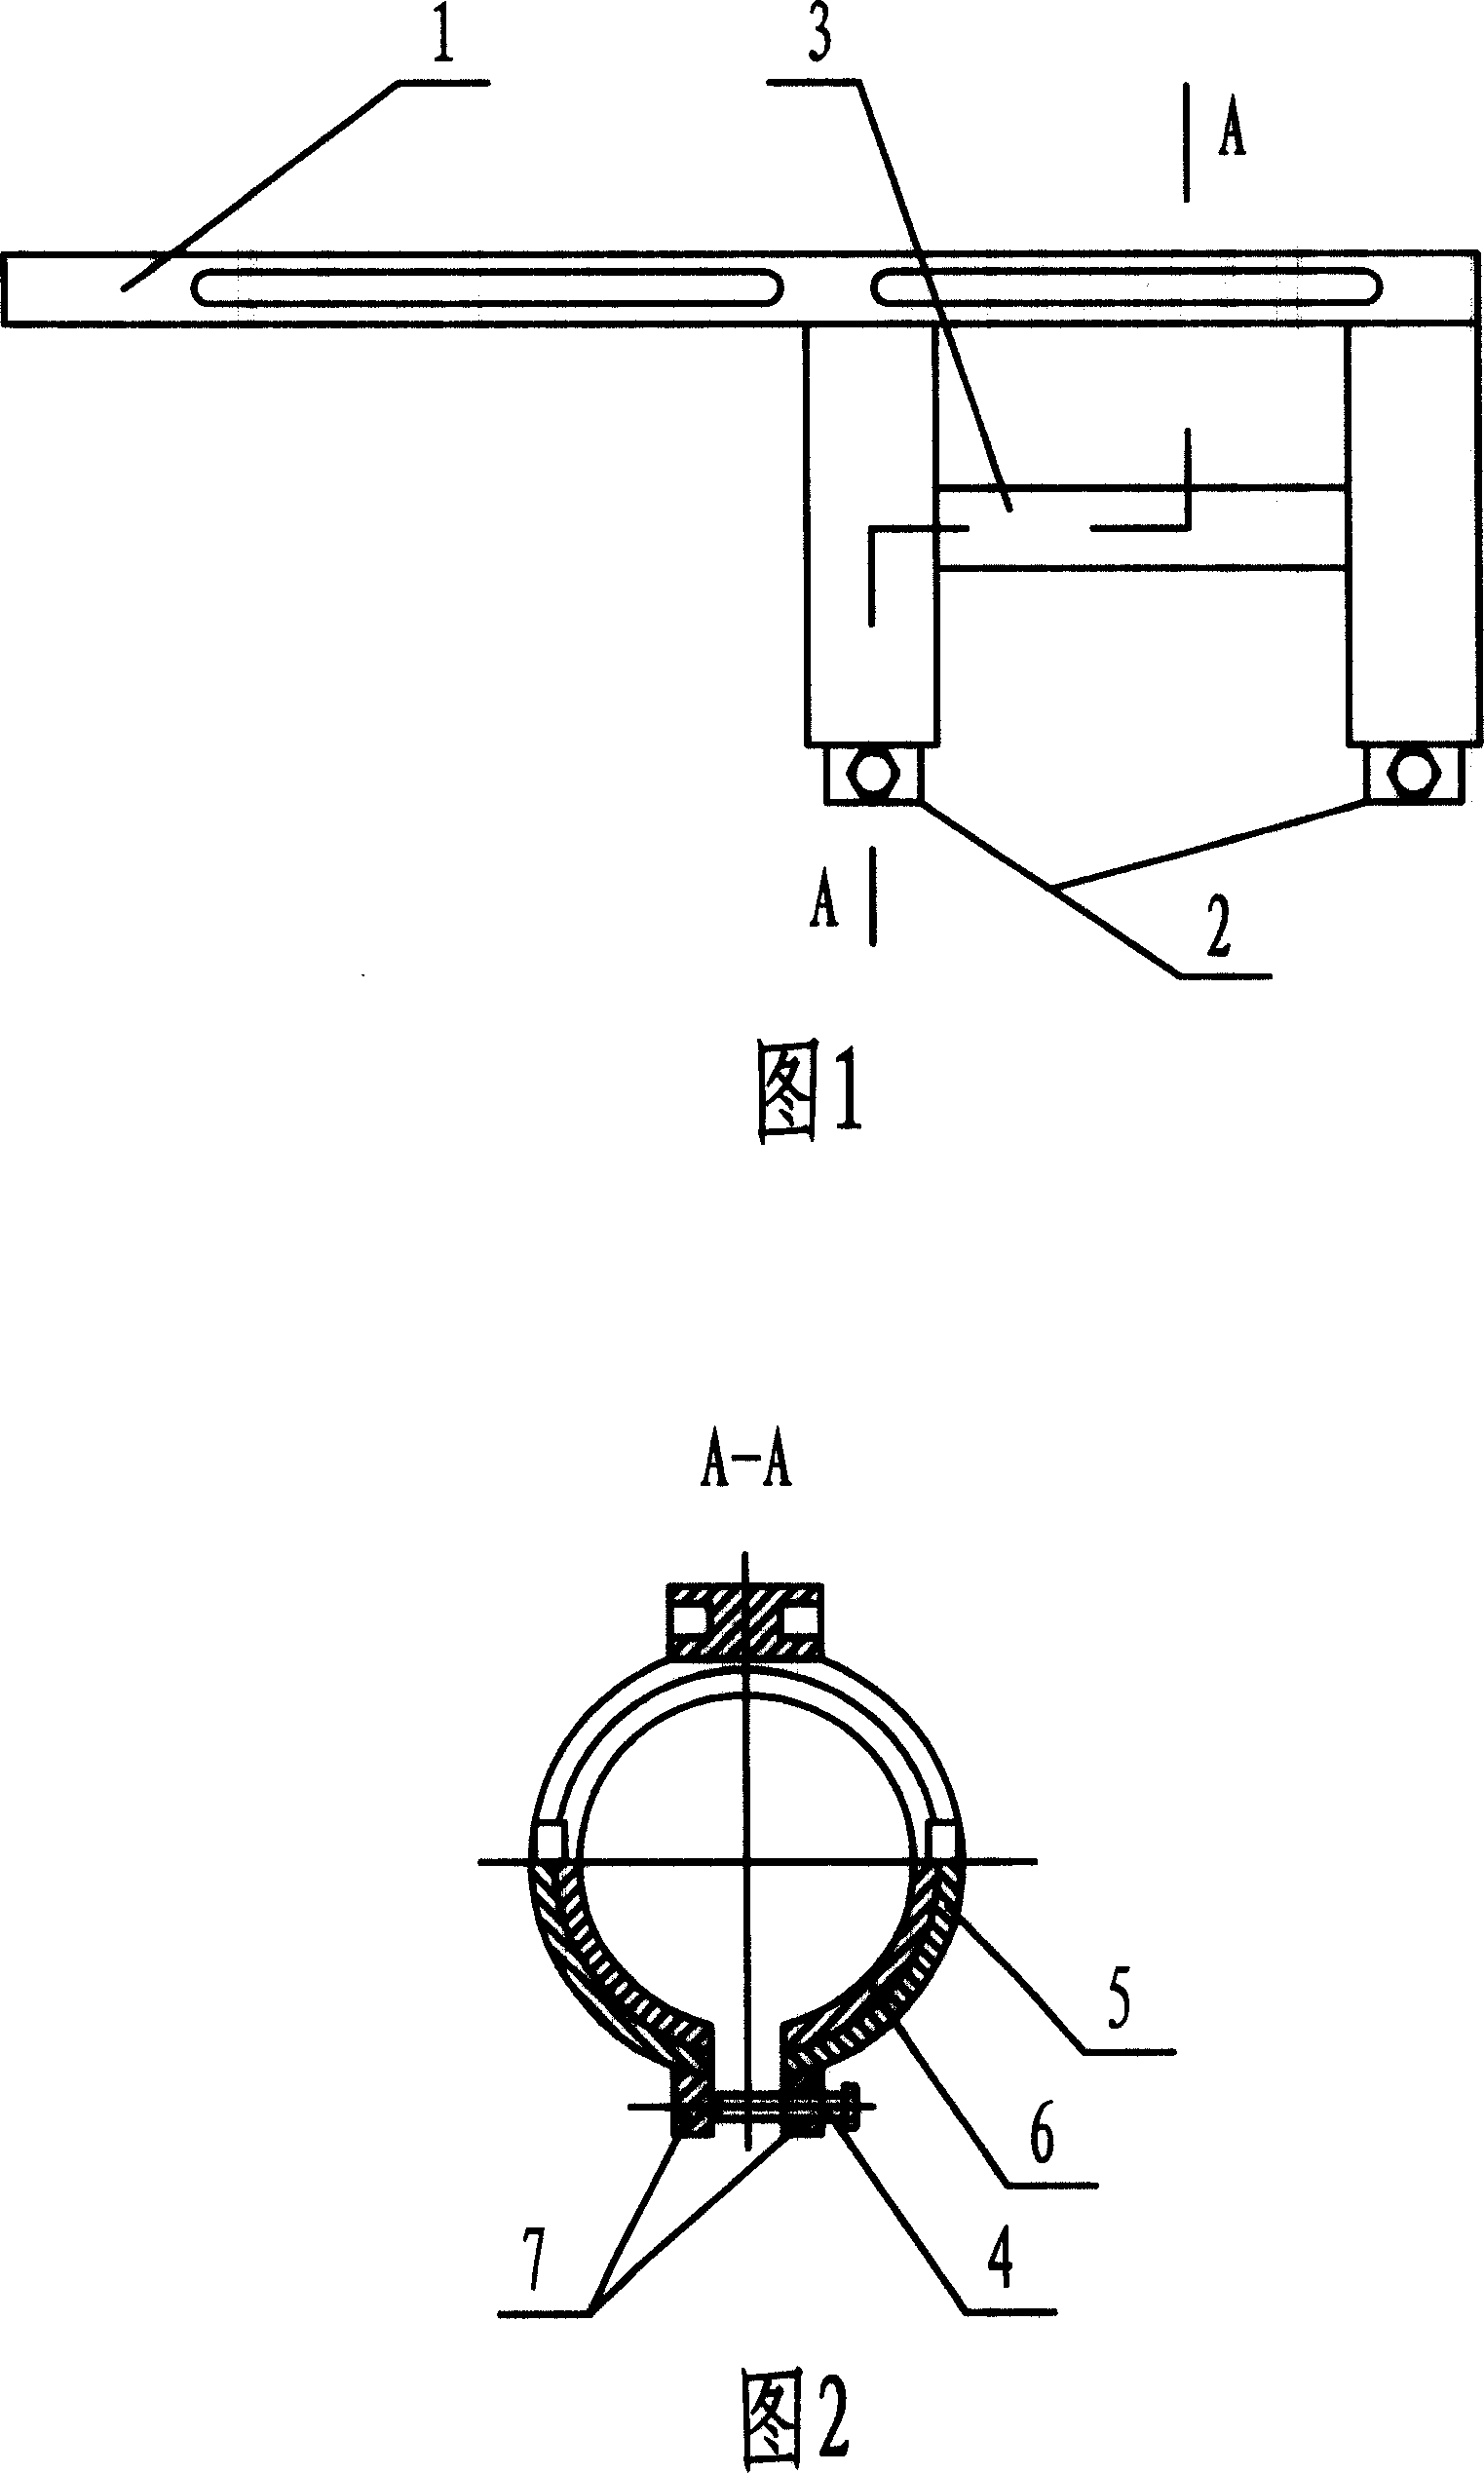 Non-flange shafts centring device